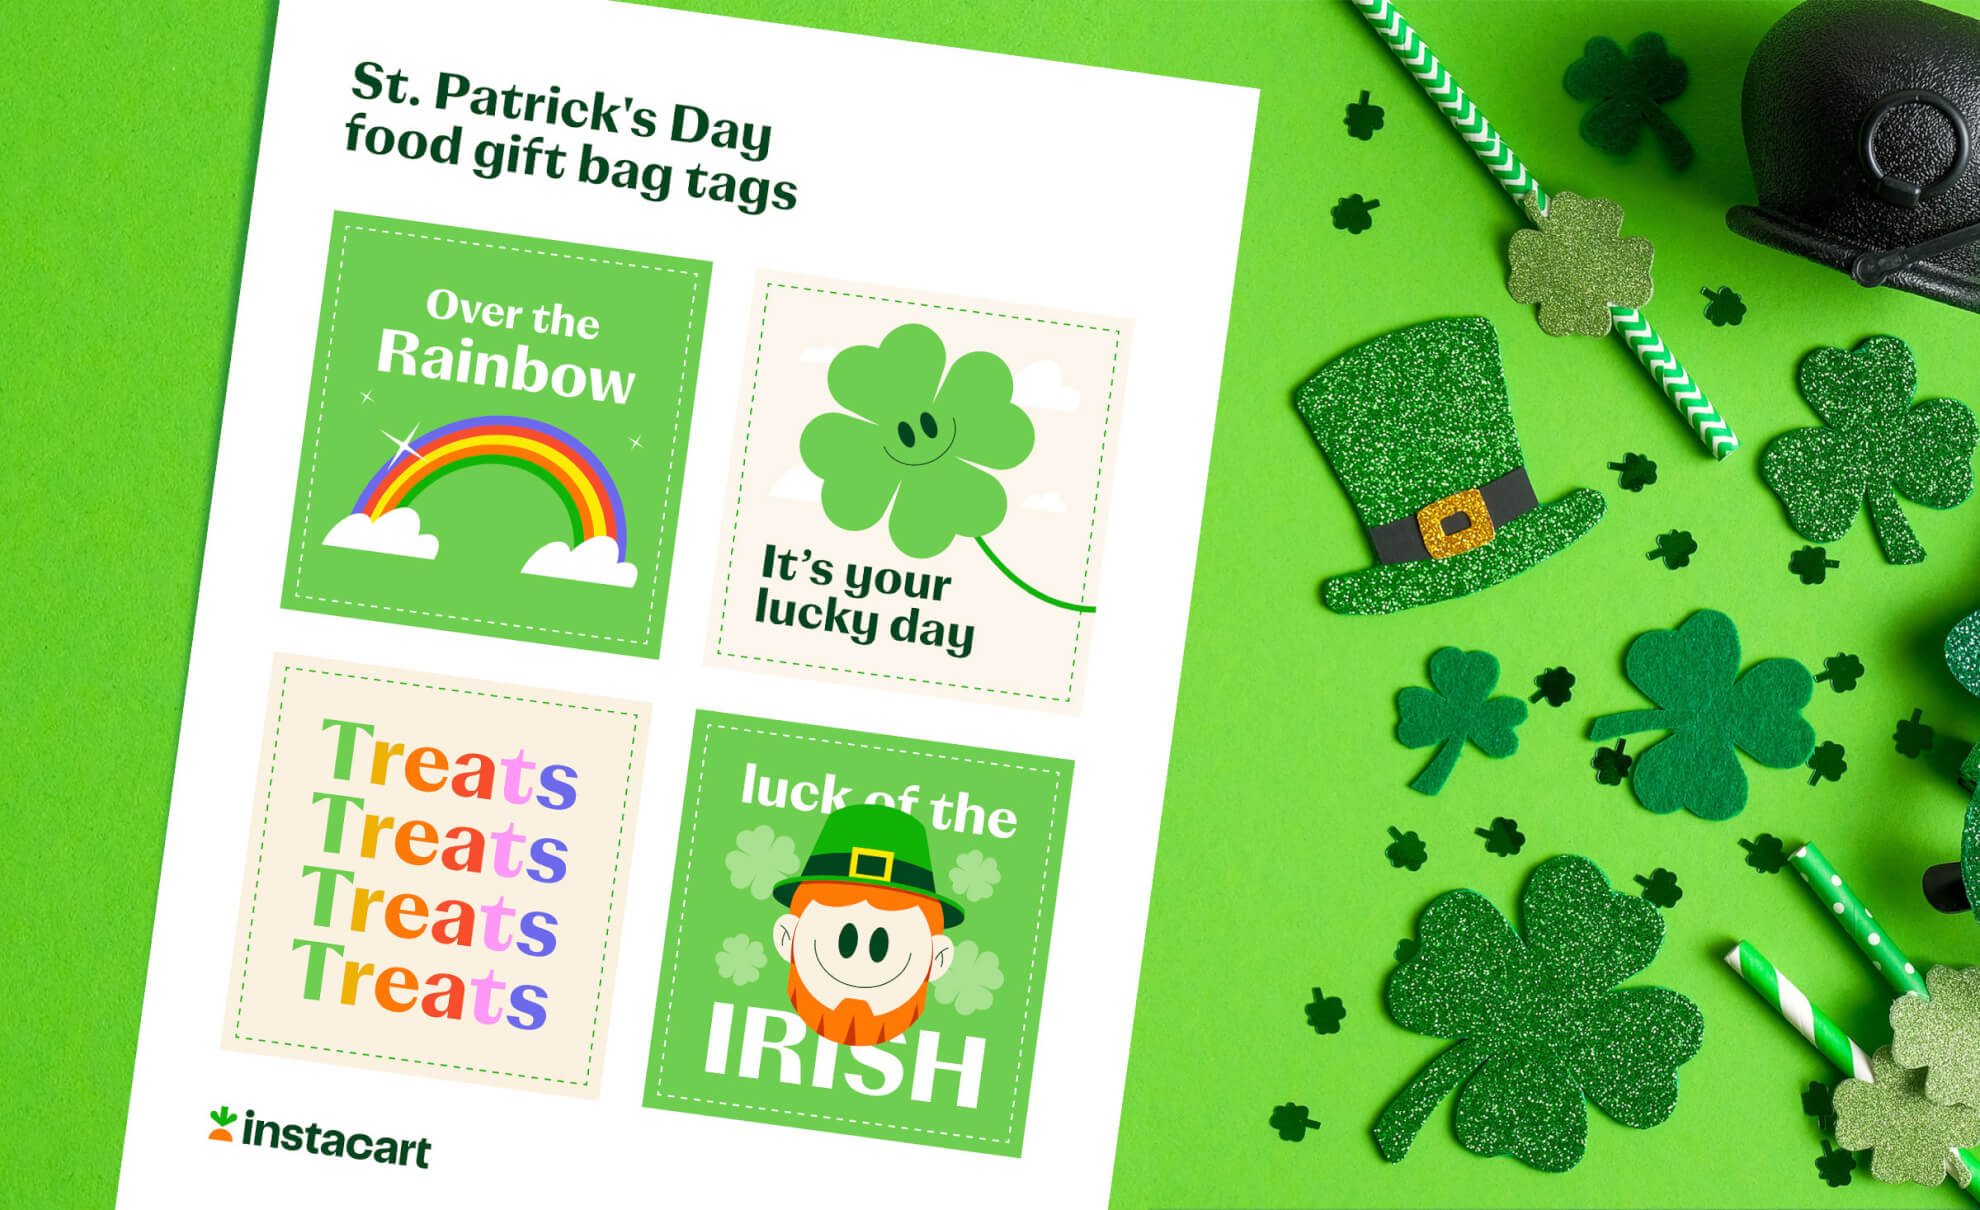 St. Patrick's Day food gift bag tags 